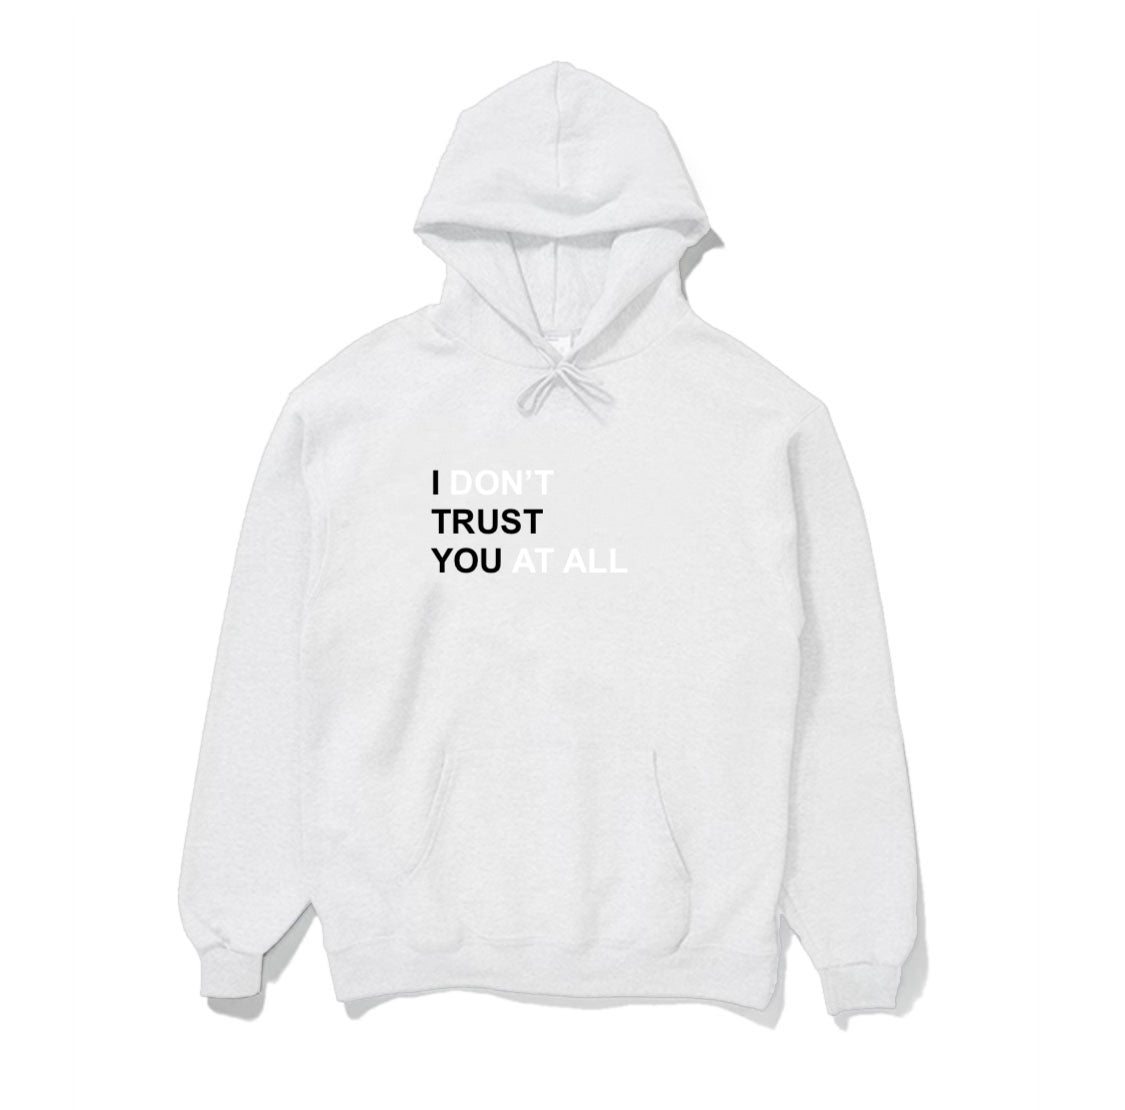 I DON'T TRUST YOU AT ALL HOODIE